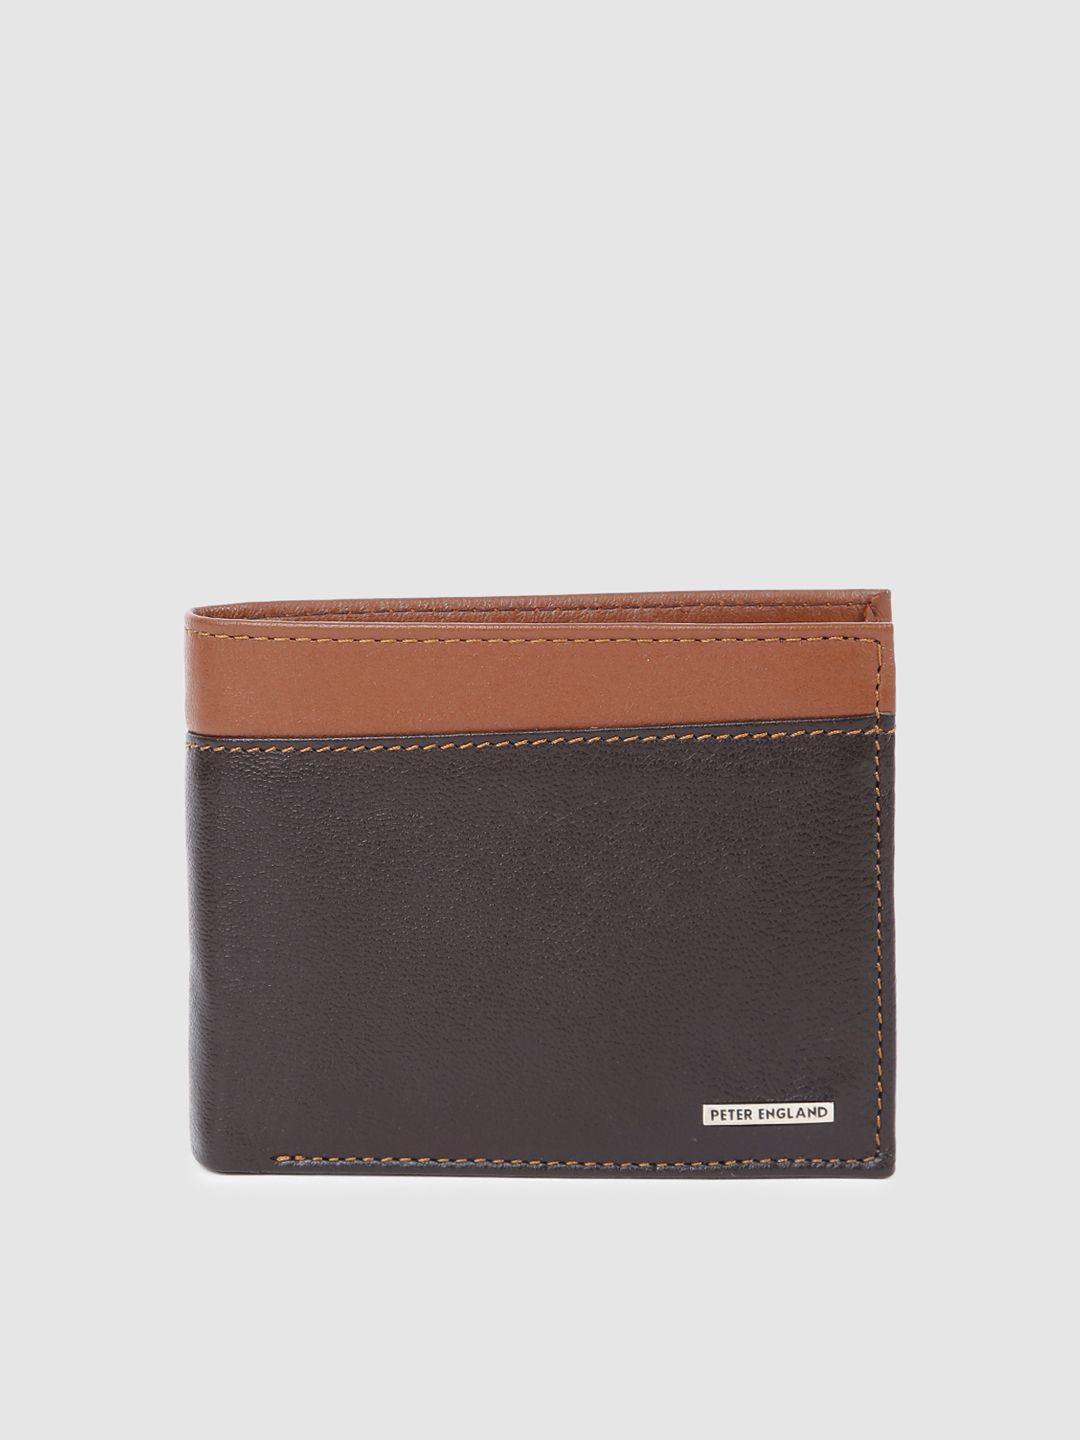 peter england men brown & tan solid leather two fold wallet